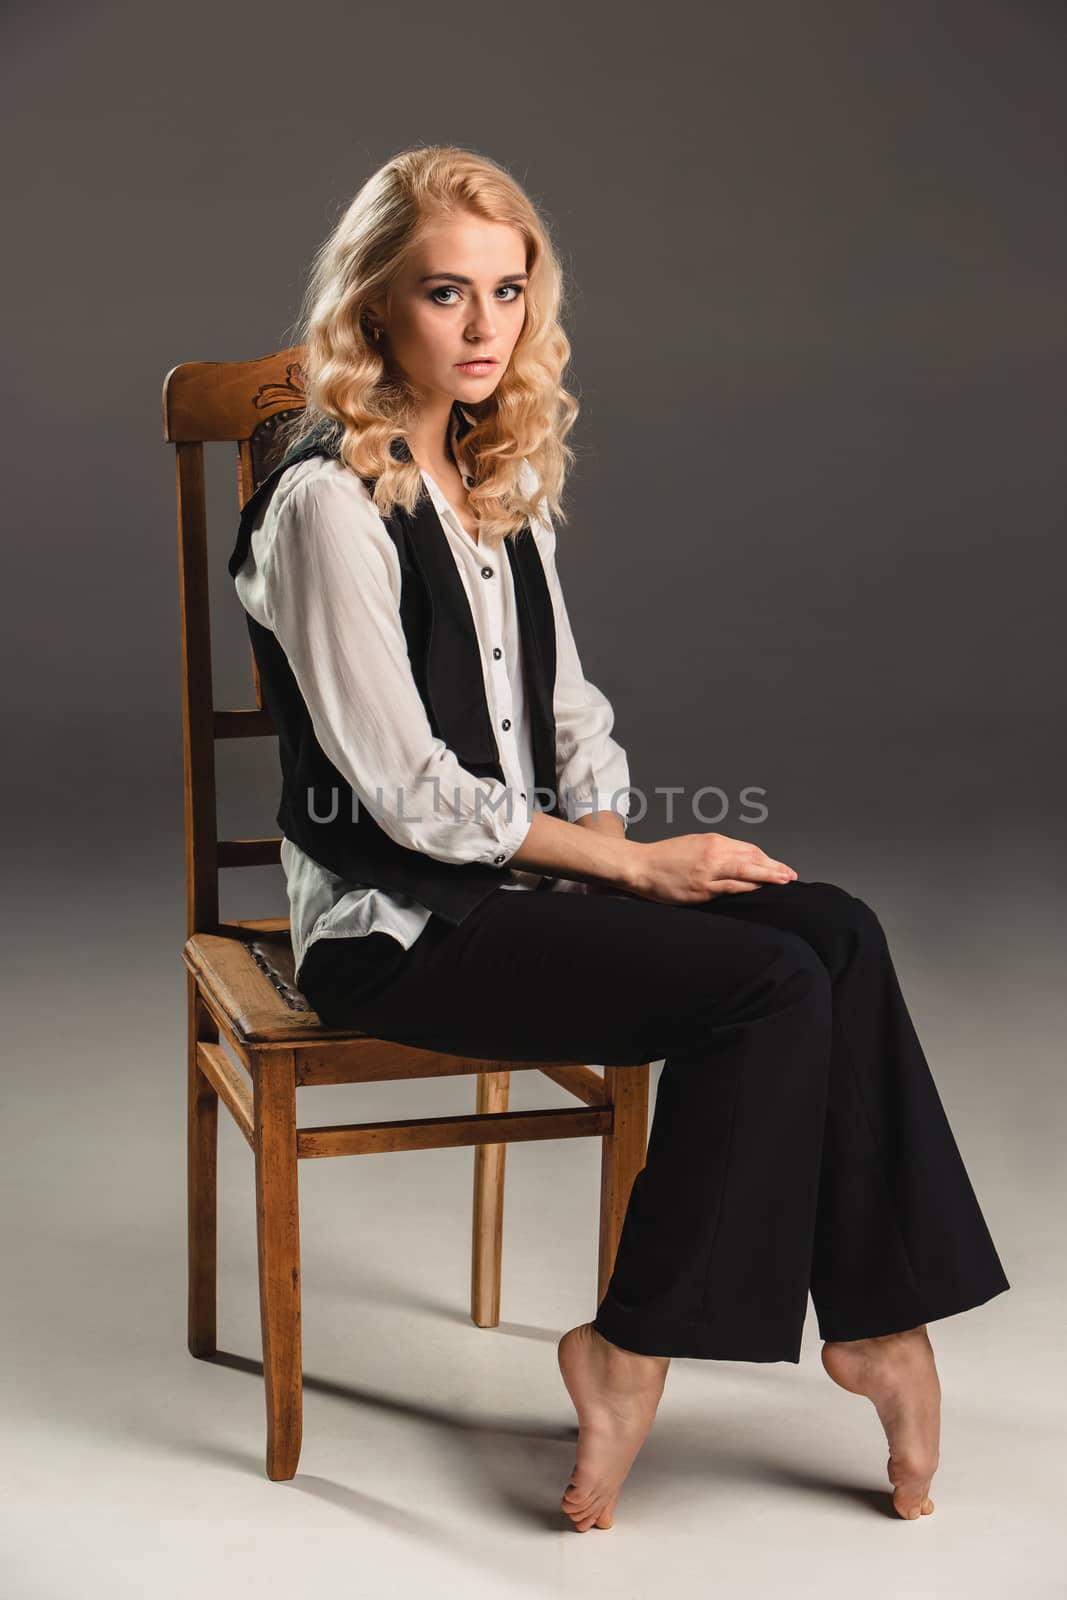 Beauty blond woman  in a black suit on chair on a gray background